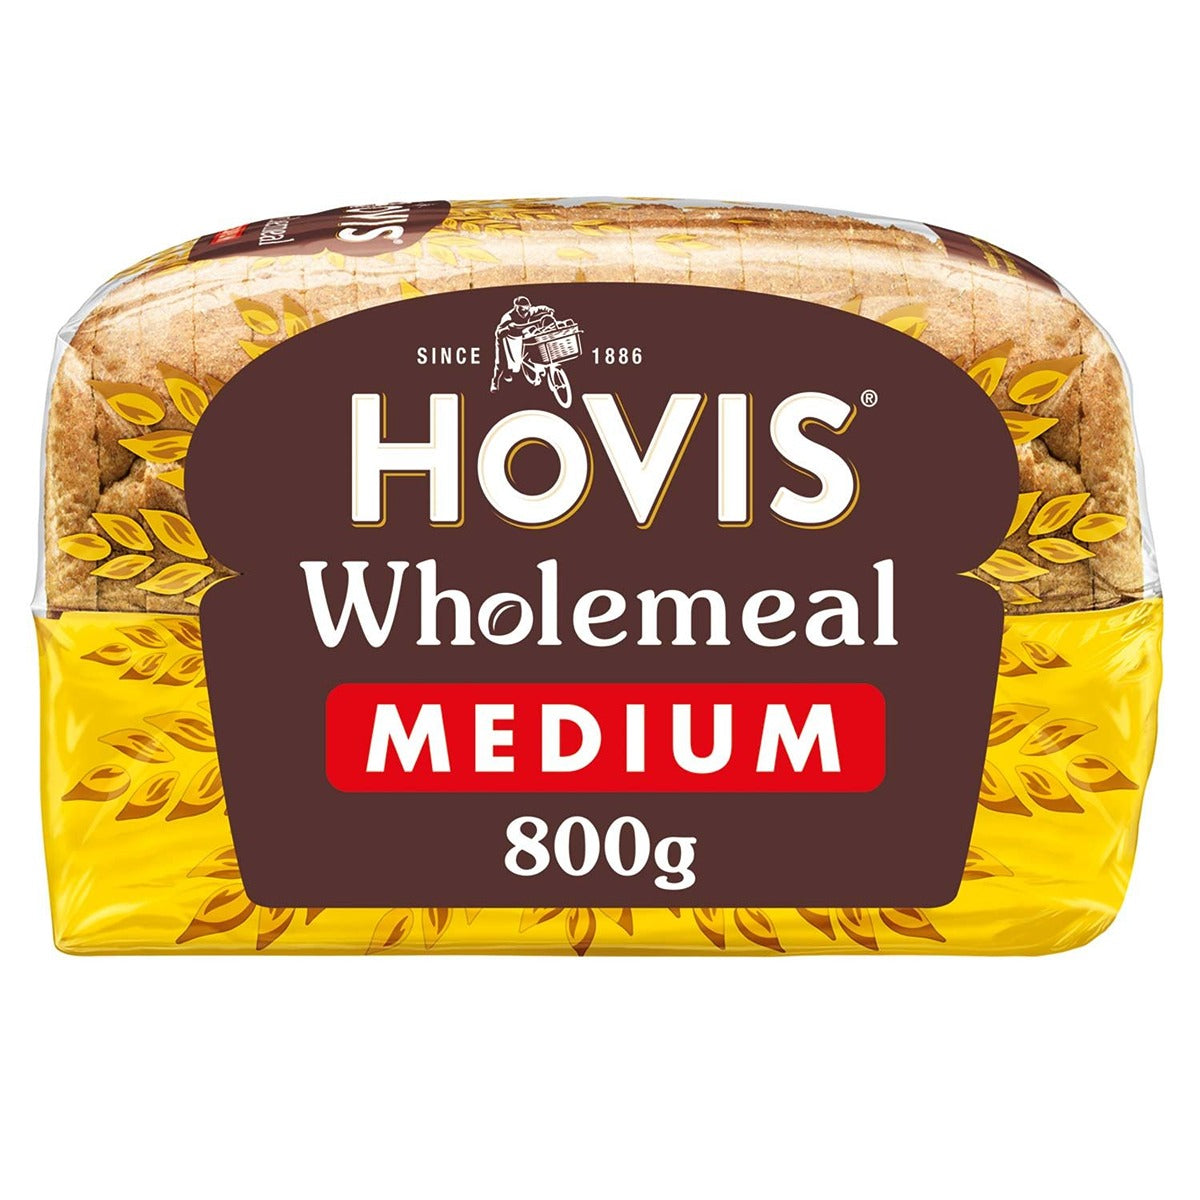 Hovis - Wholemeal Medium Bread - 800g - Continental Food Store